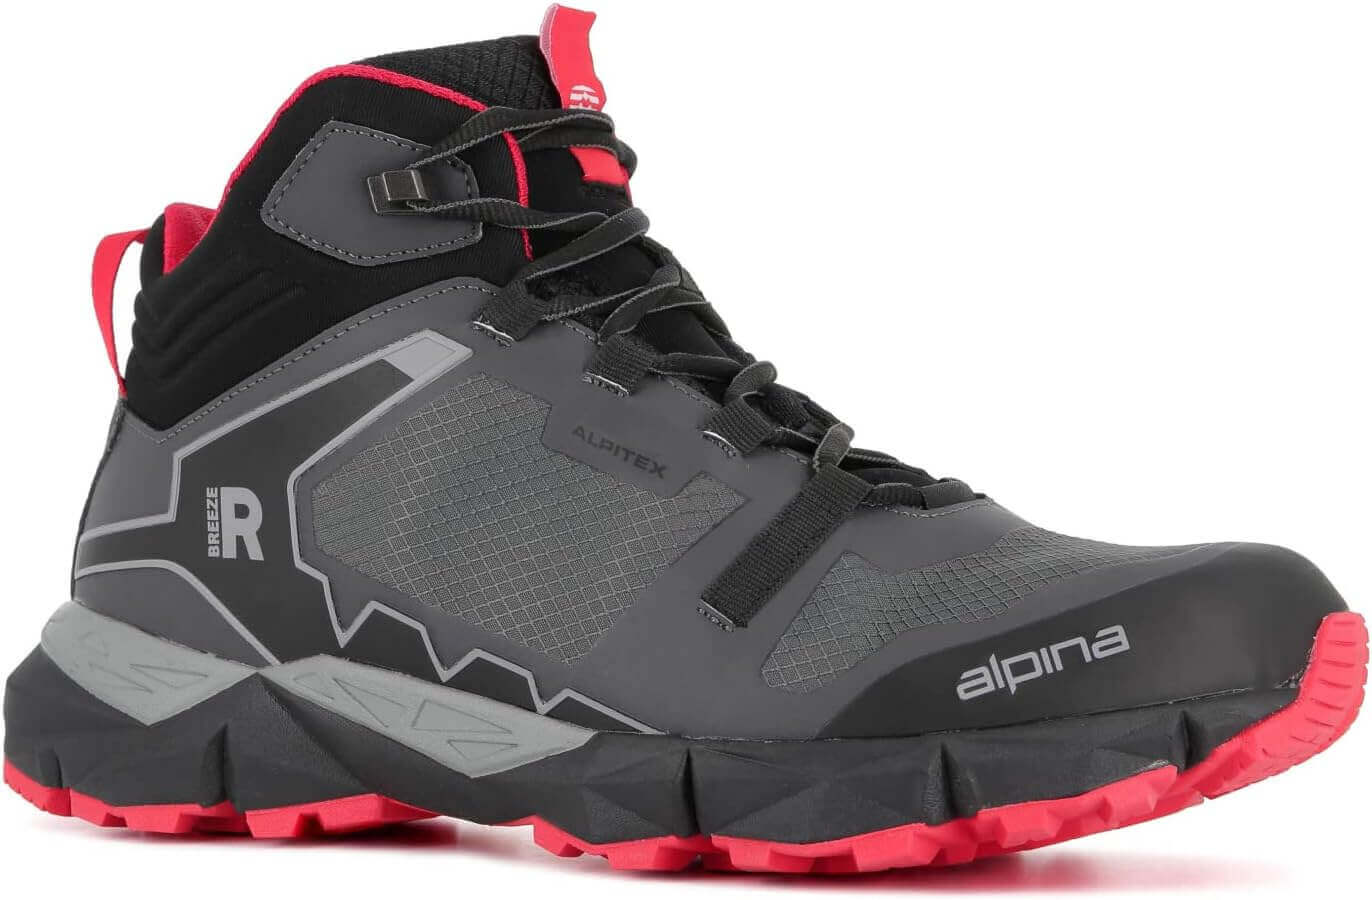 Shop The Latest >Alpina Men's and Women's Waterproof Breathable Hiking Shoes > *Only $228.15*> From The Top Brand > *Alpinal* > Shop Now and Get Free Shipping On Orders Over $45.00 >*Shop Earth Foot*